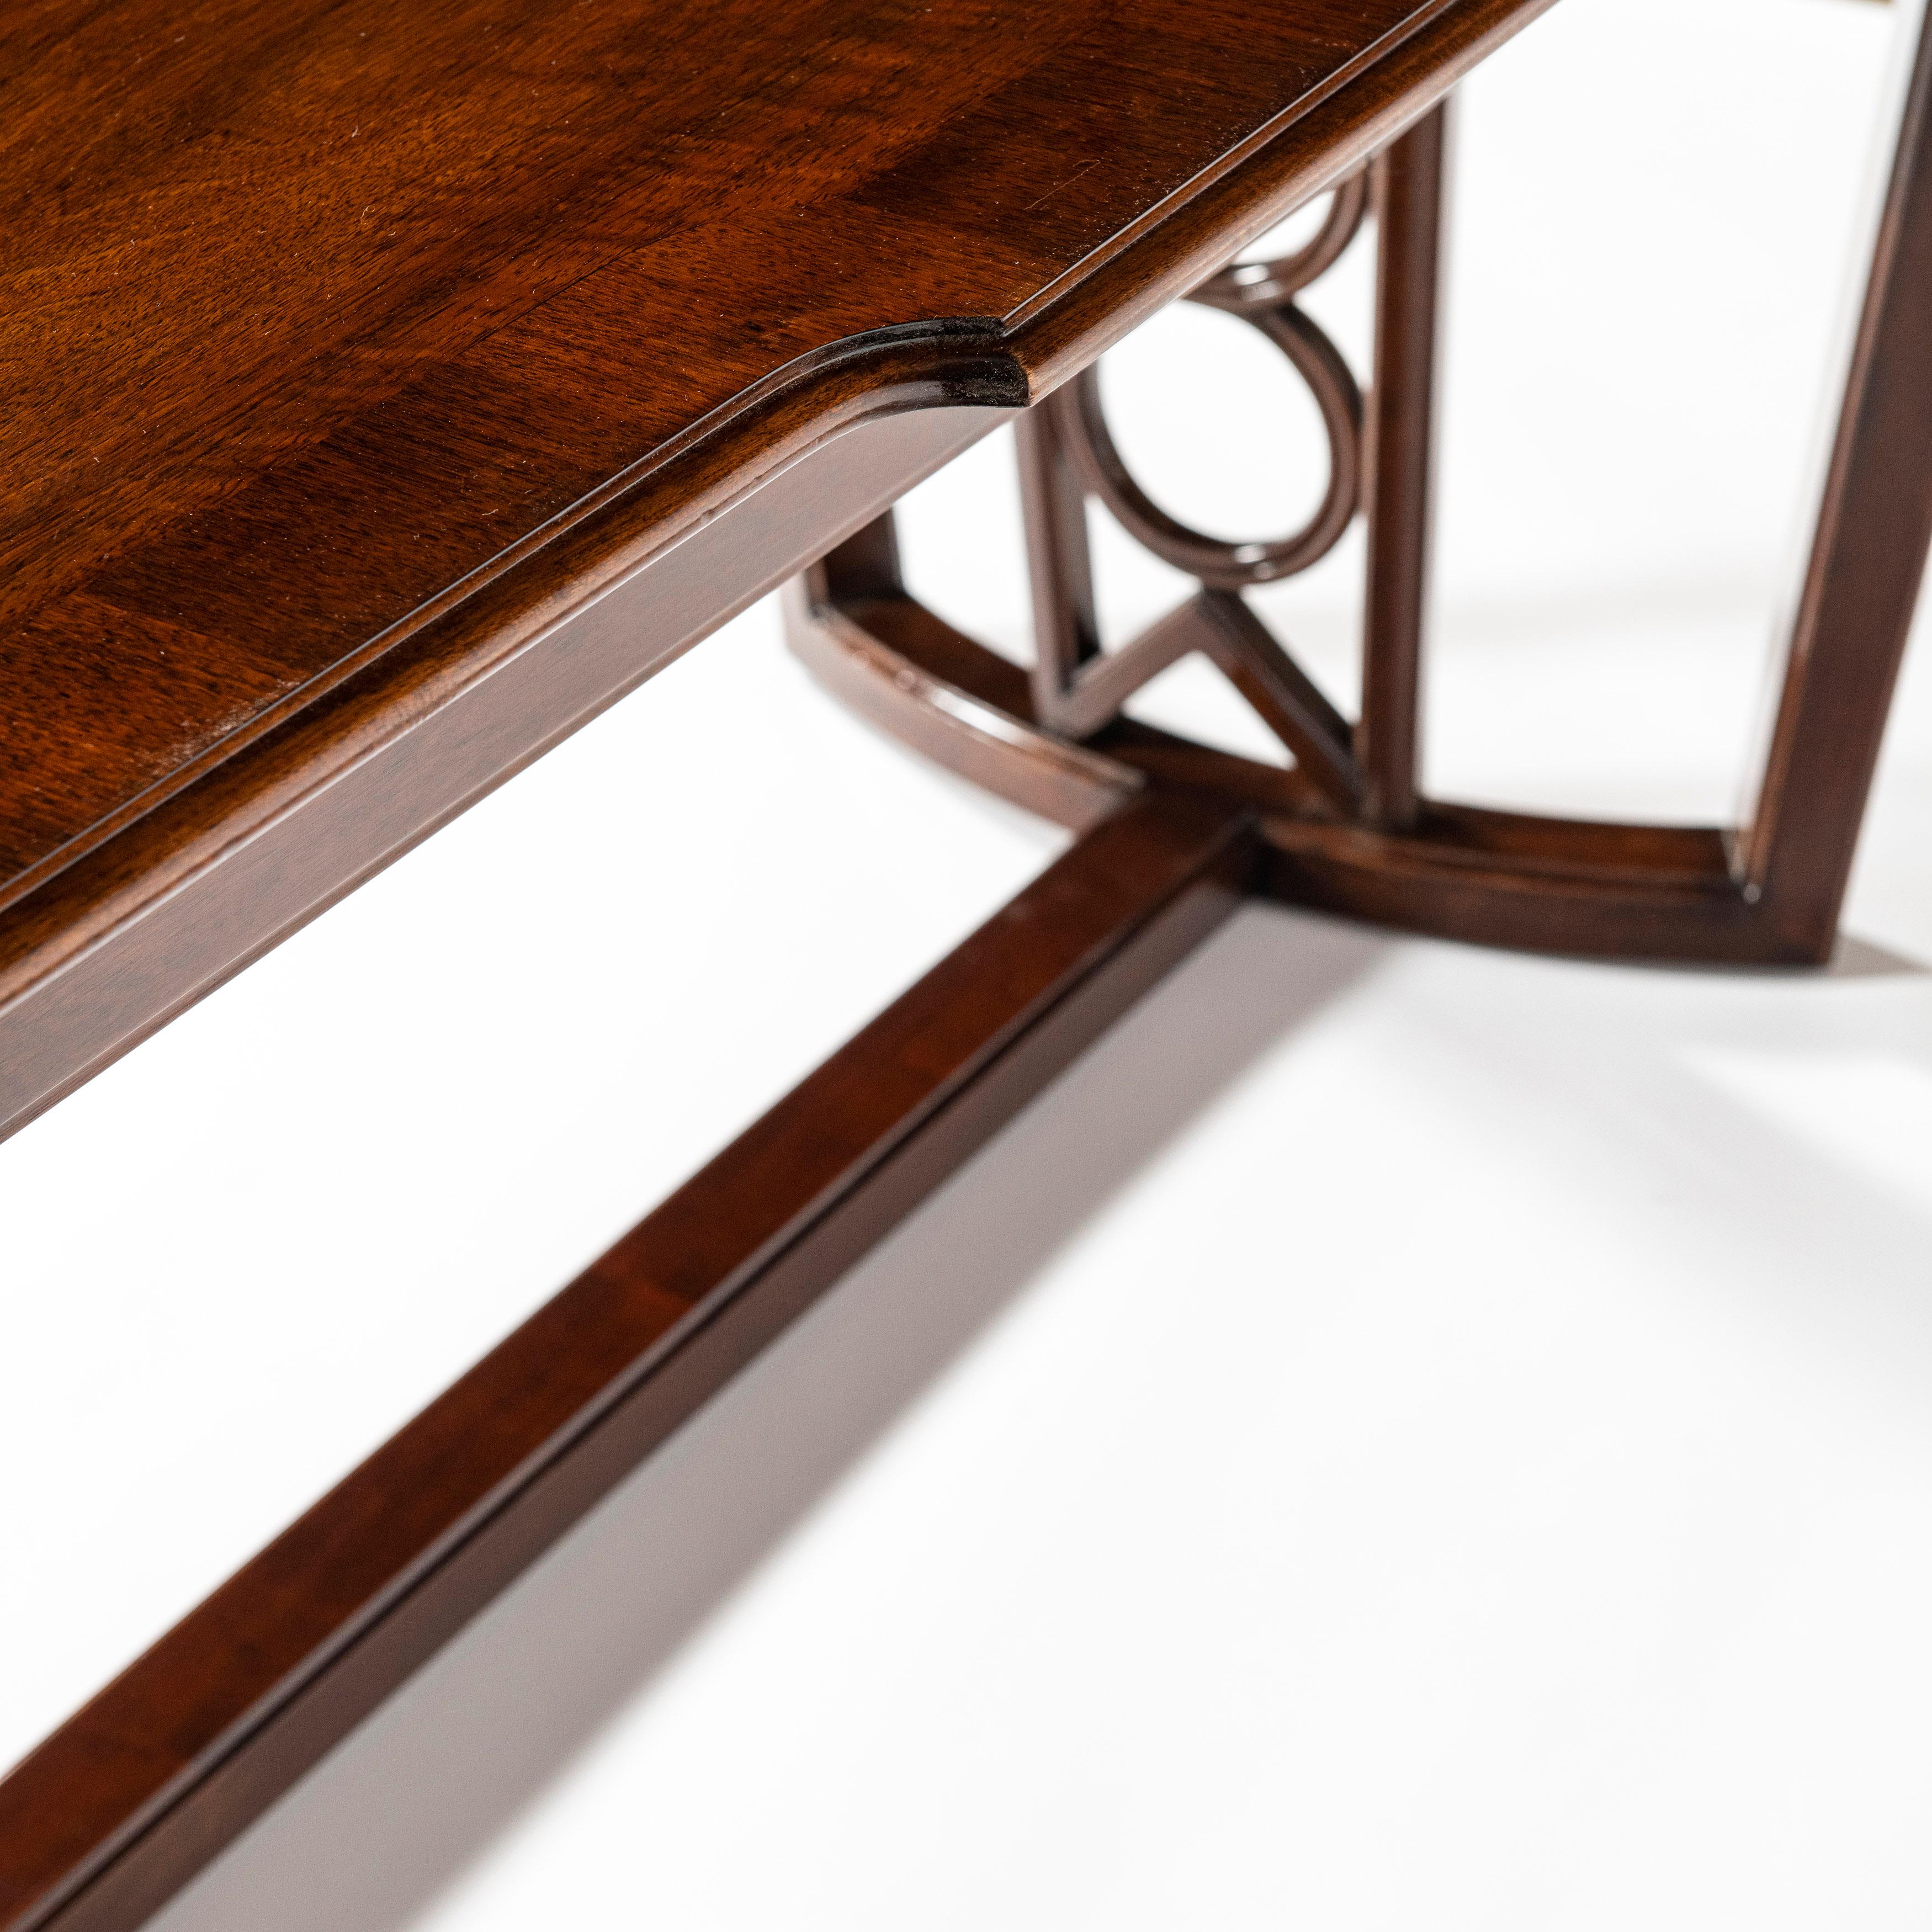 Argentine Wood and Glass Dining Room Table by Englander & Bonta, Argentina, circa 1950 For Sale